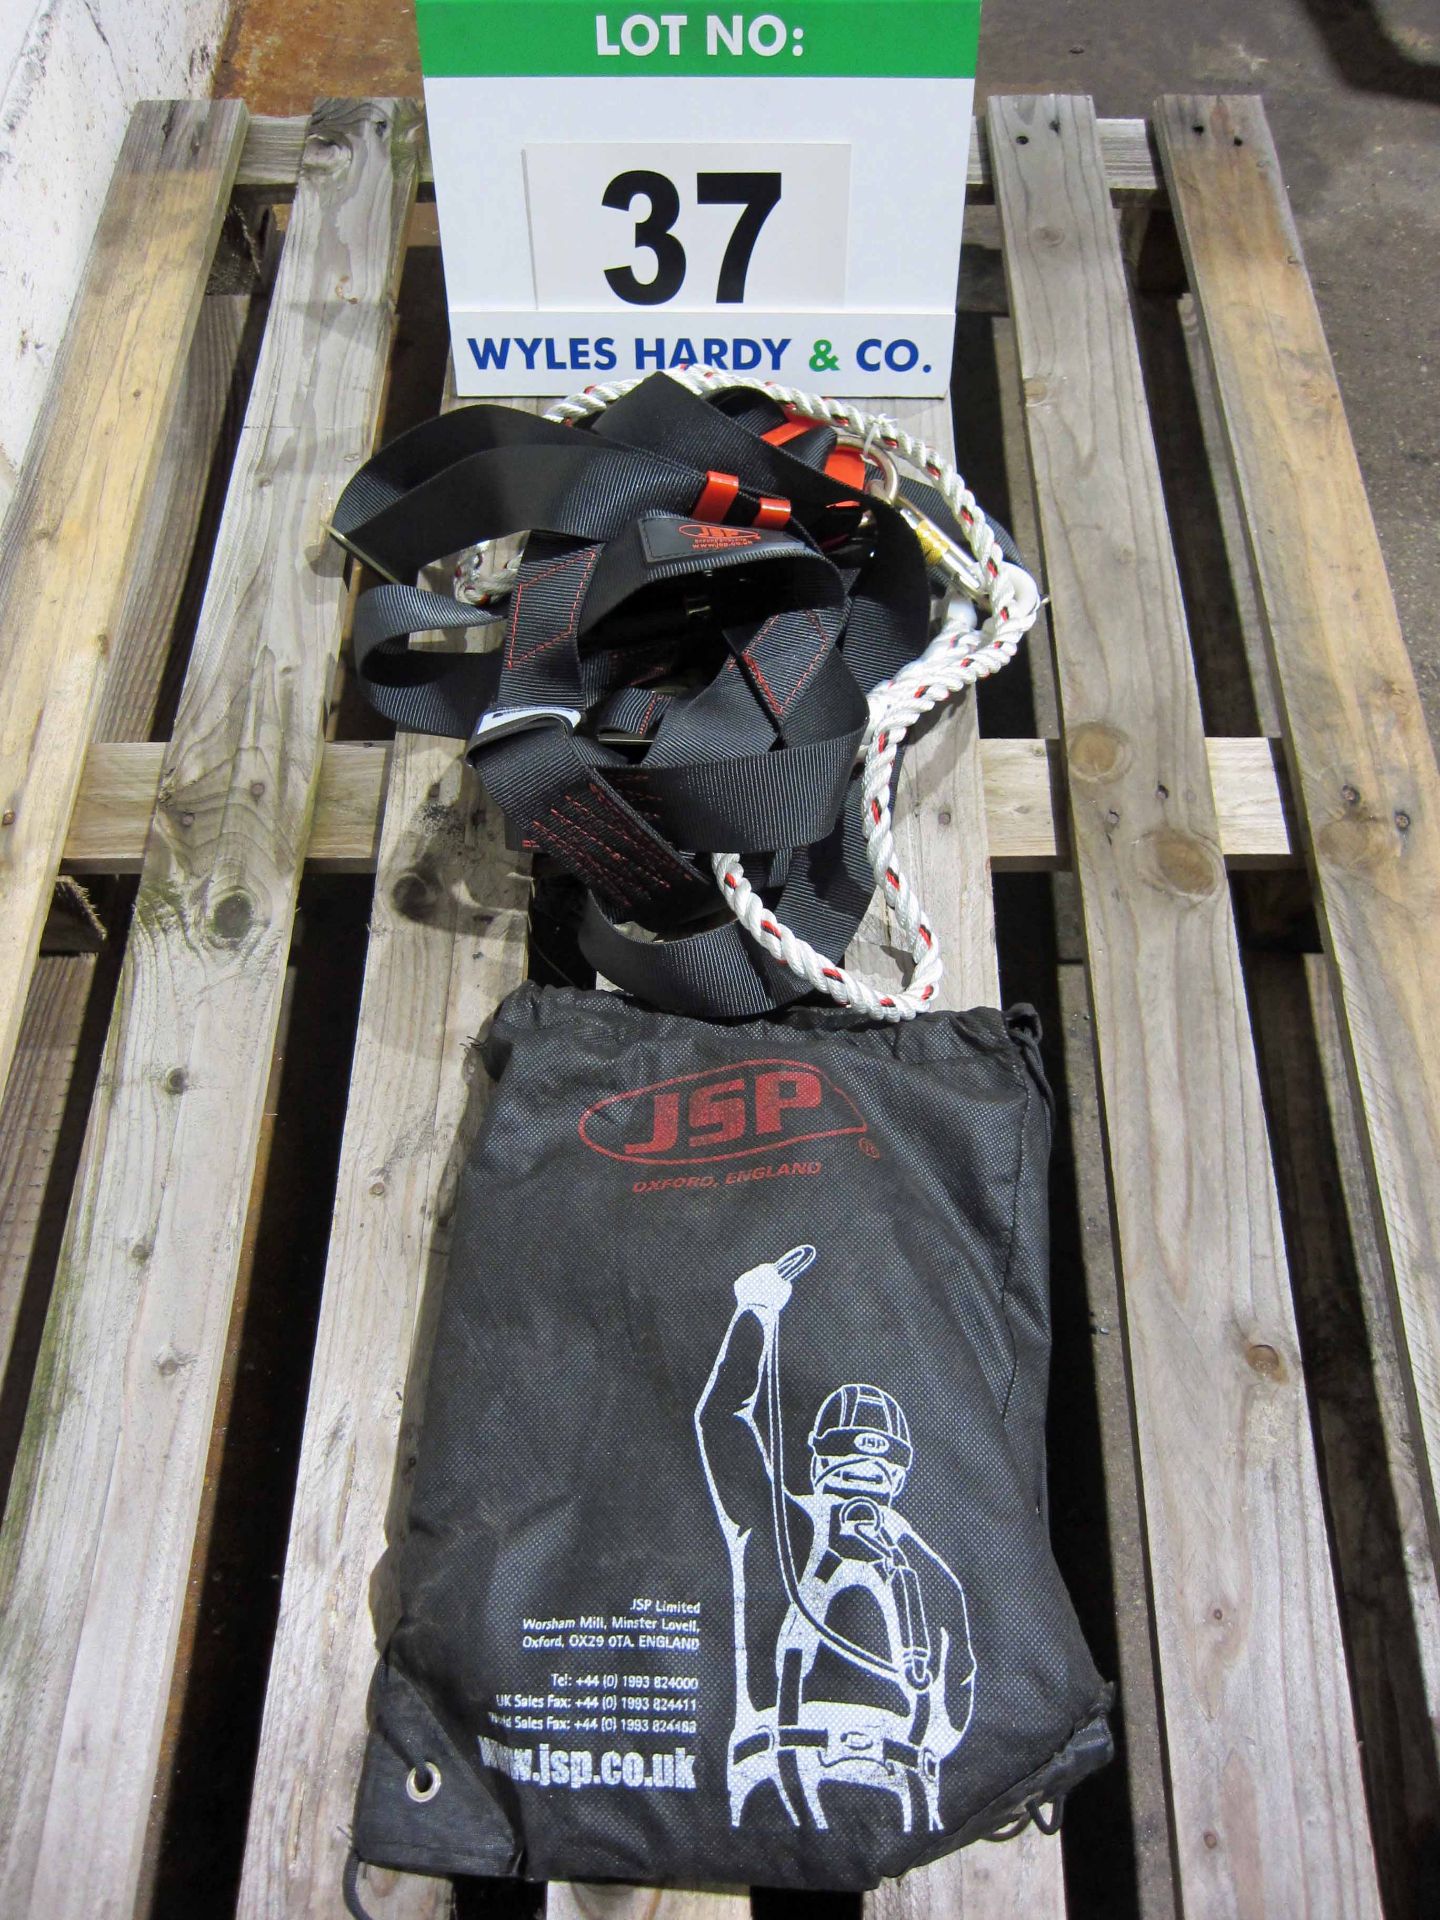 A JSP Fall Arrest Harness in Carry Bag (Unused)